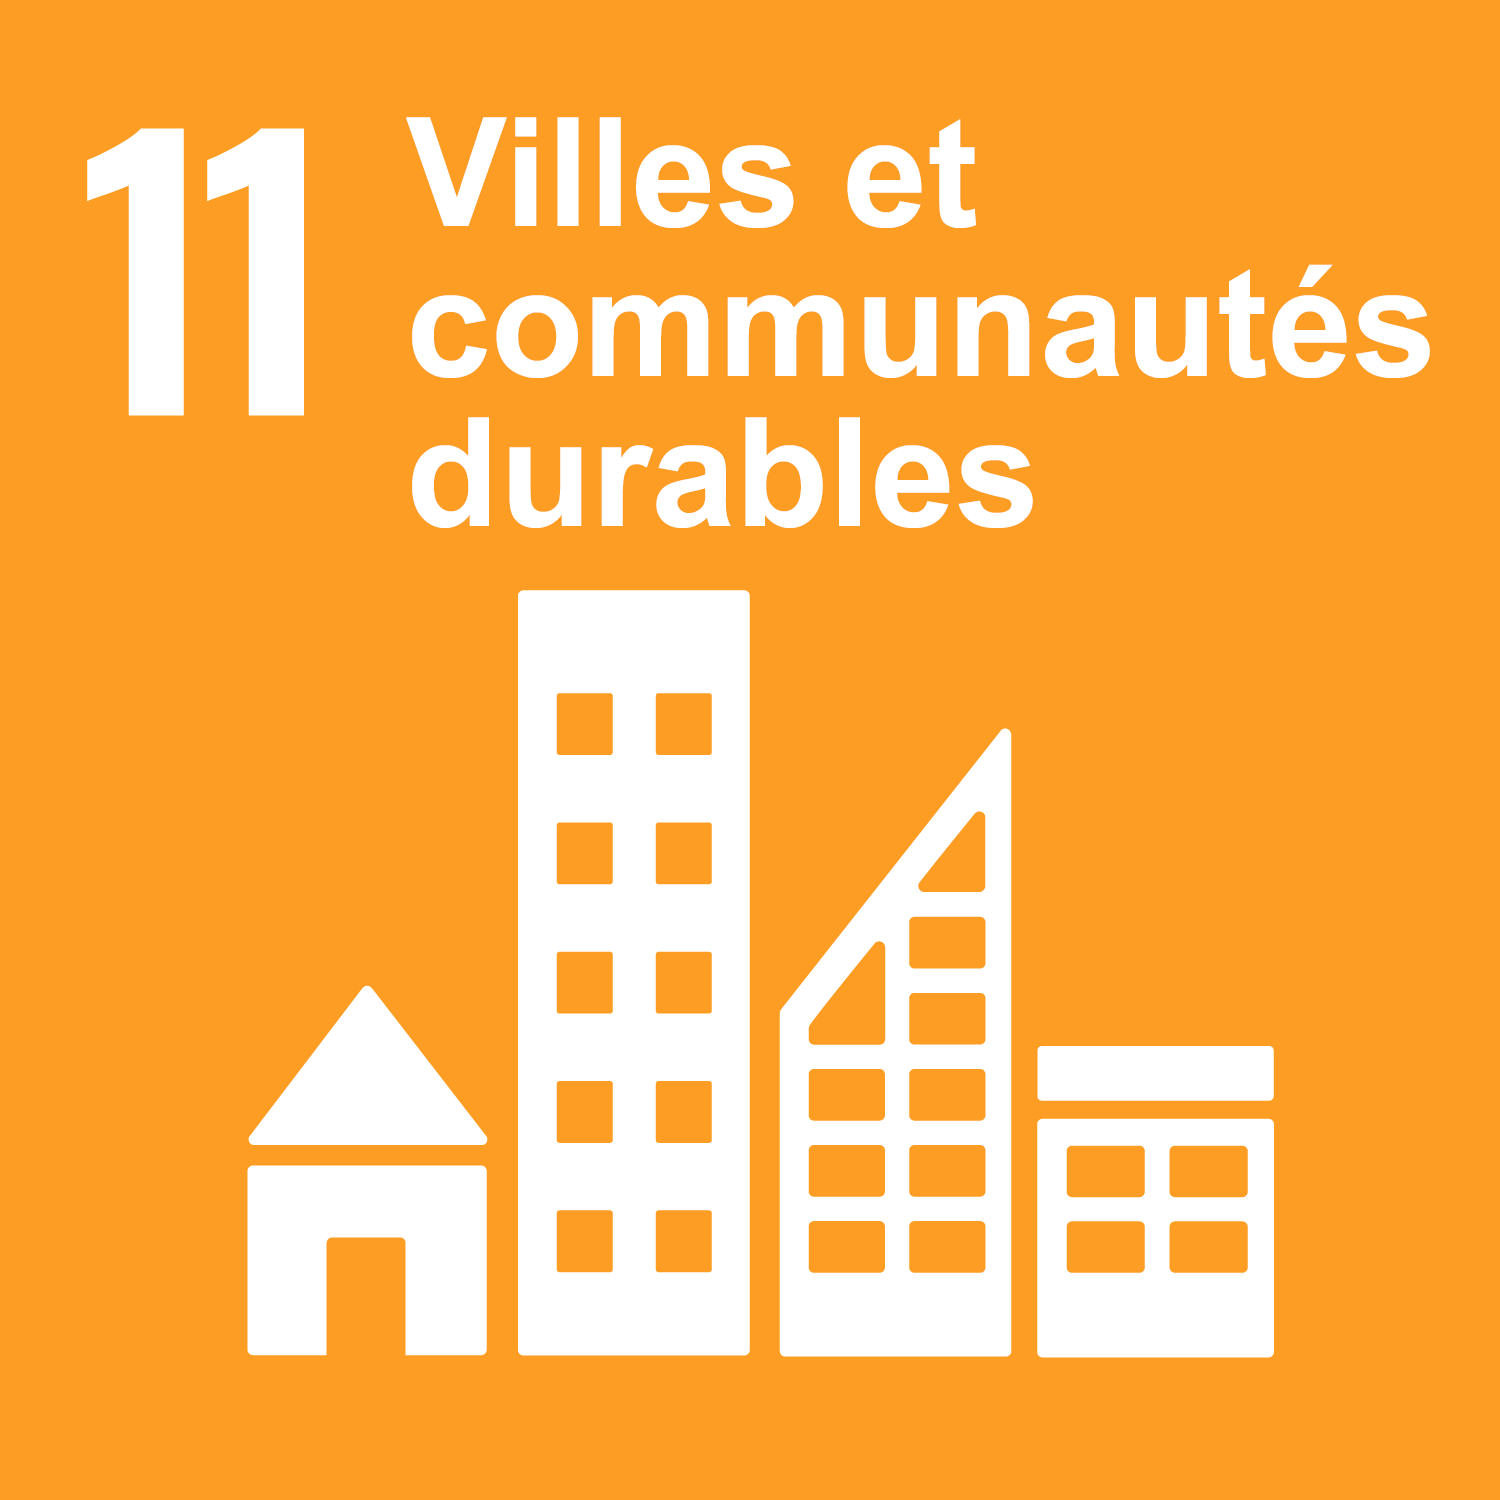 Goal 11: Sustainable cities and communities 